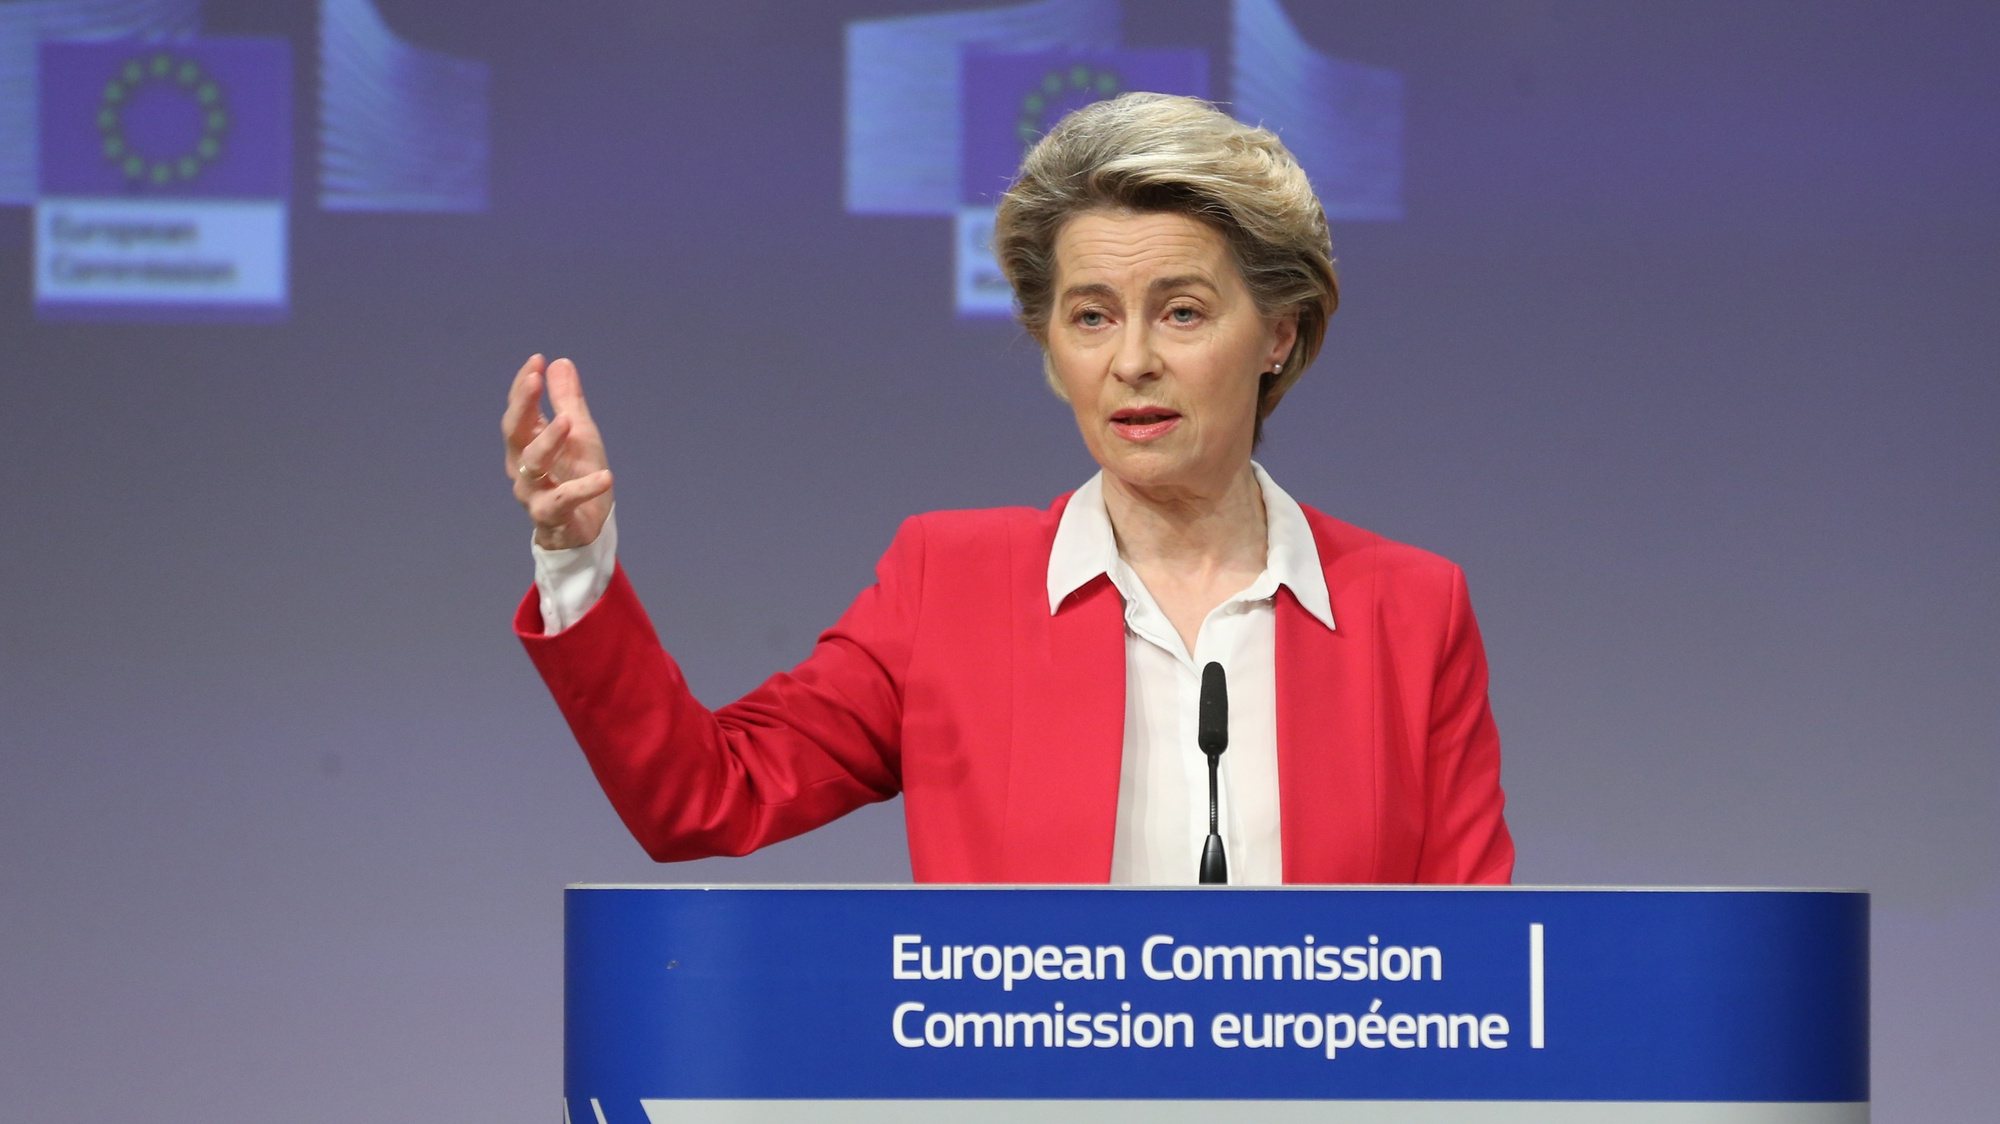 epa08925861 European Commission President Ursula Von der Leyen gives a presser on the EU&#039;s vaccine strategy in Brussels, Belgium, 08 January 2021. Von der Leyen said the EU Commission had ordered a further 300 million COVID-19 vaccine doses from Biontech / Pfizer.  EPA/FRANCOIS WALSCHAERTS / POOL